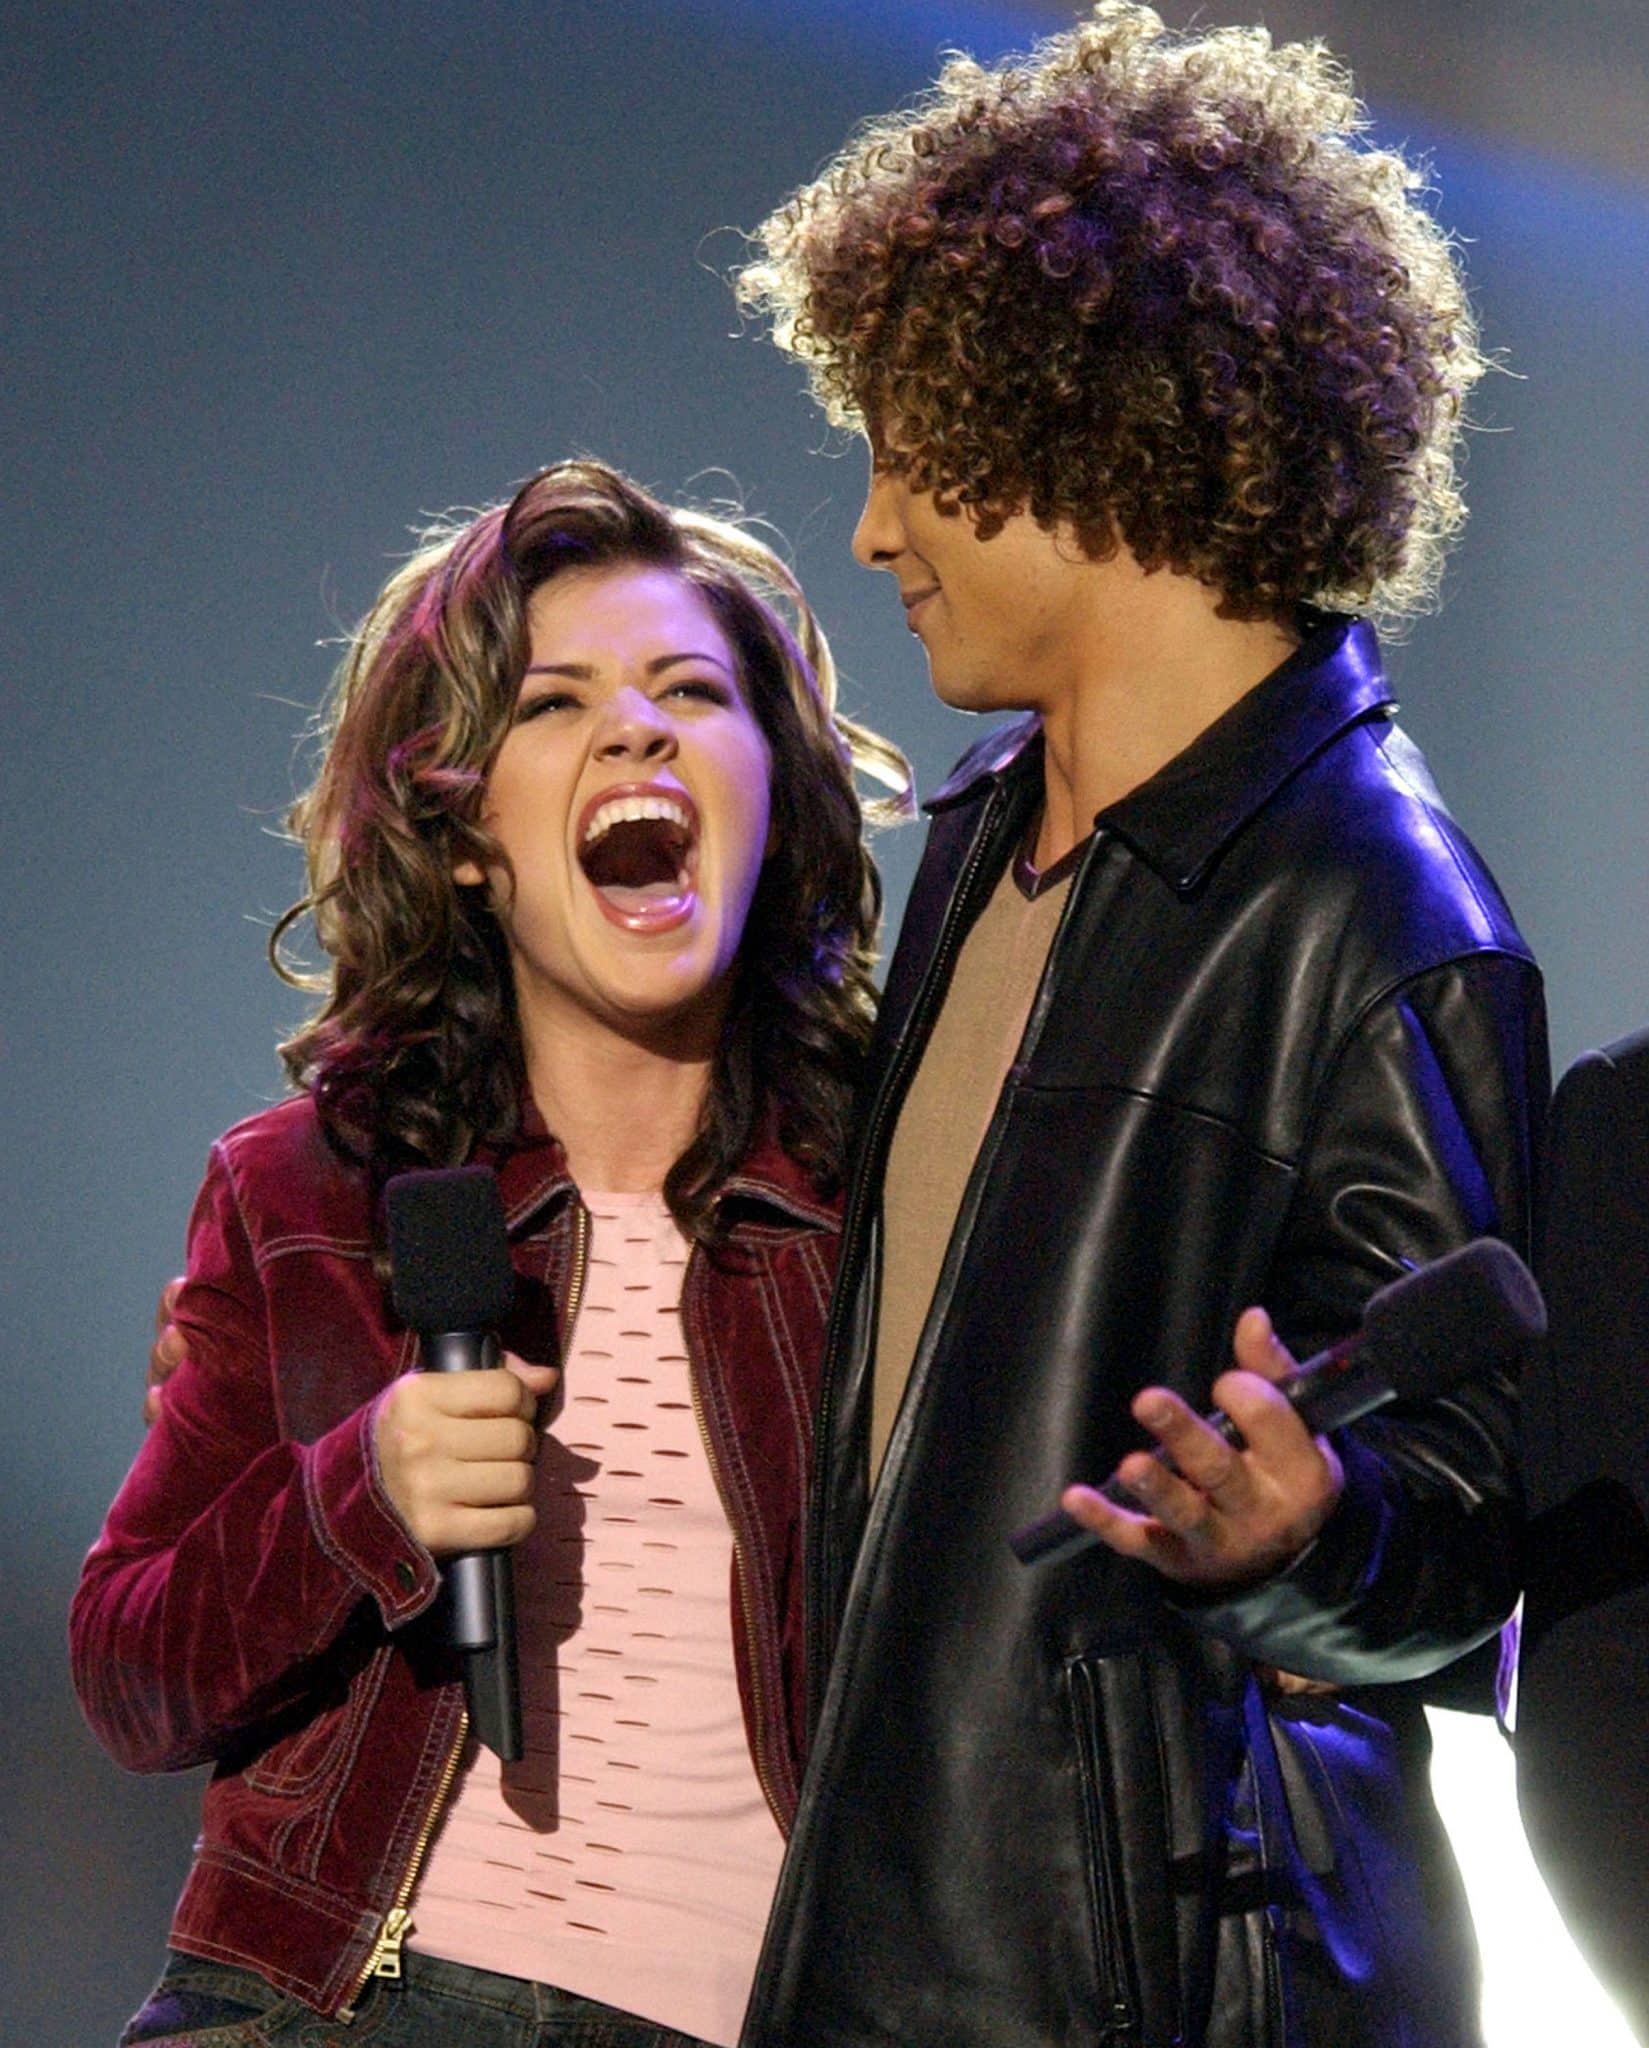 Kelly Clarkson won Season 1 of American Idol, which included co-host Brian Dunkleman (who left after the season's end).